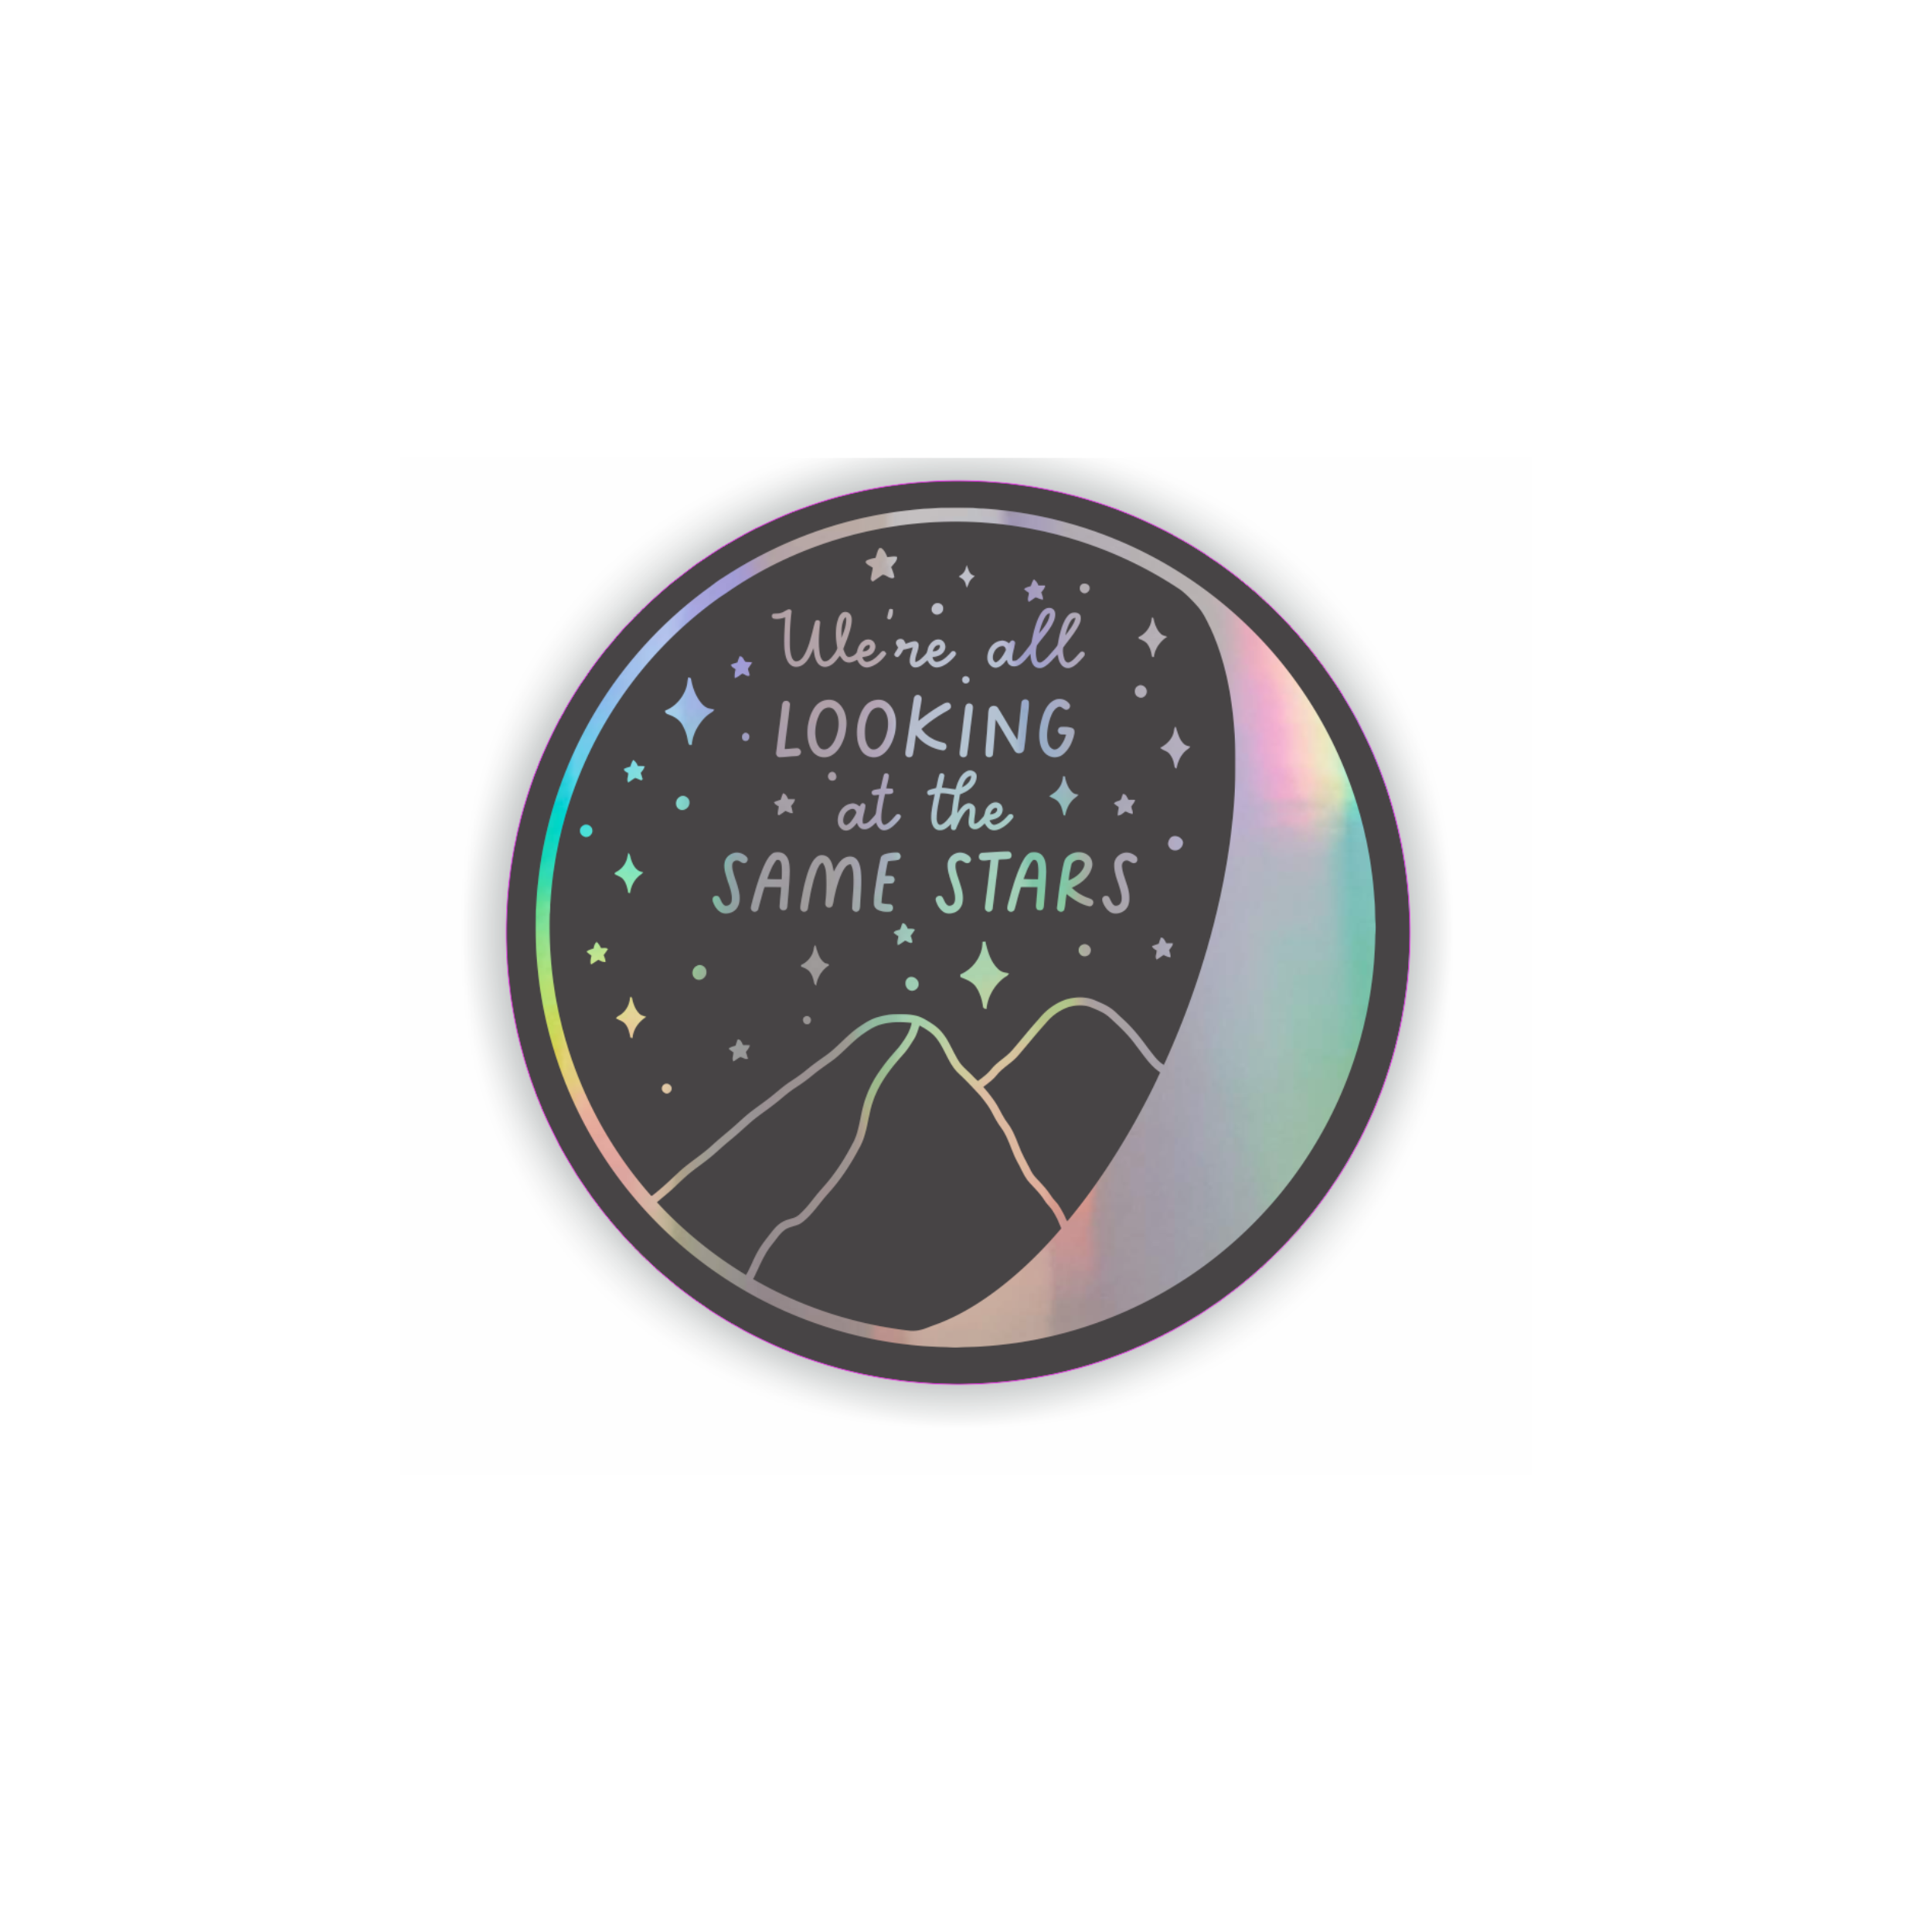 We're looking at the same stars holographic vinyl sticker